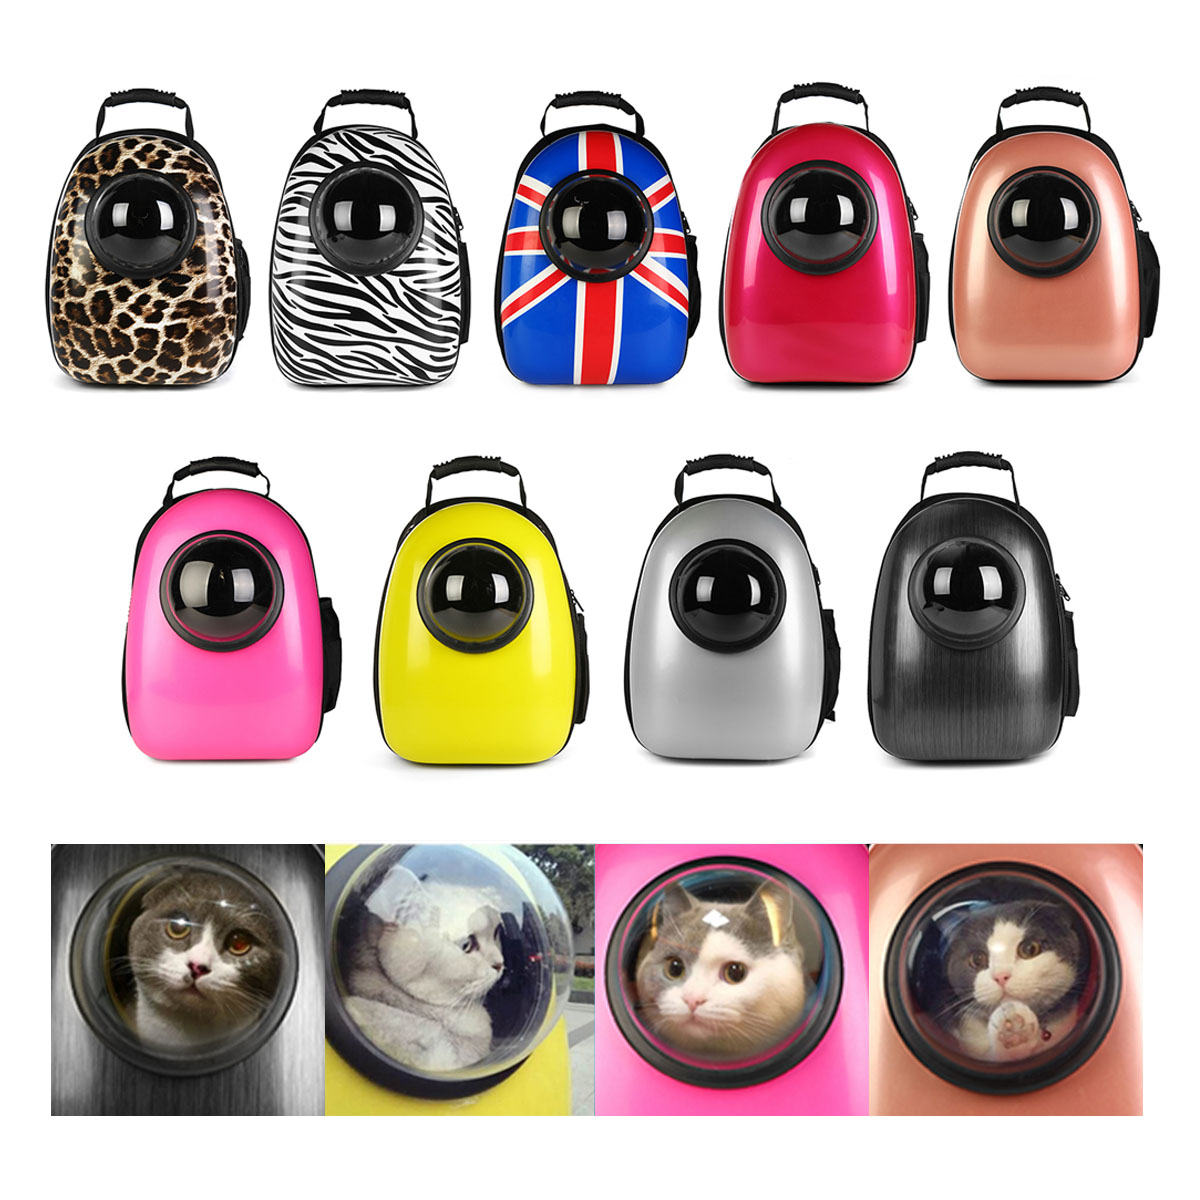 

Breathable Capsule Pet Cat&Dog Puppy Travel Astronaut Space Backpack Carrier Bag